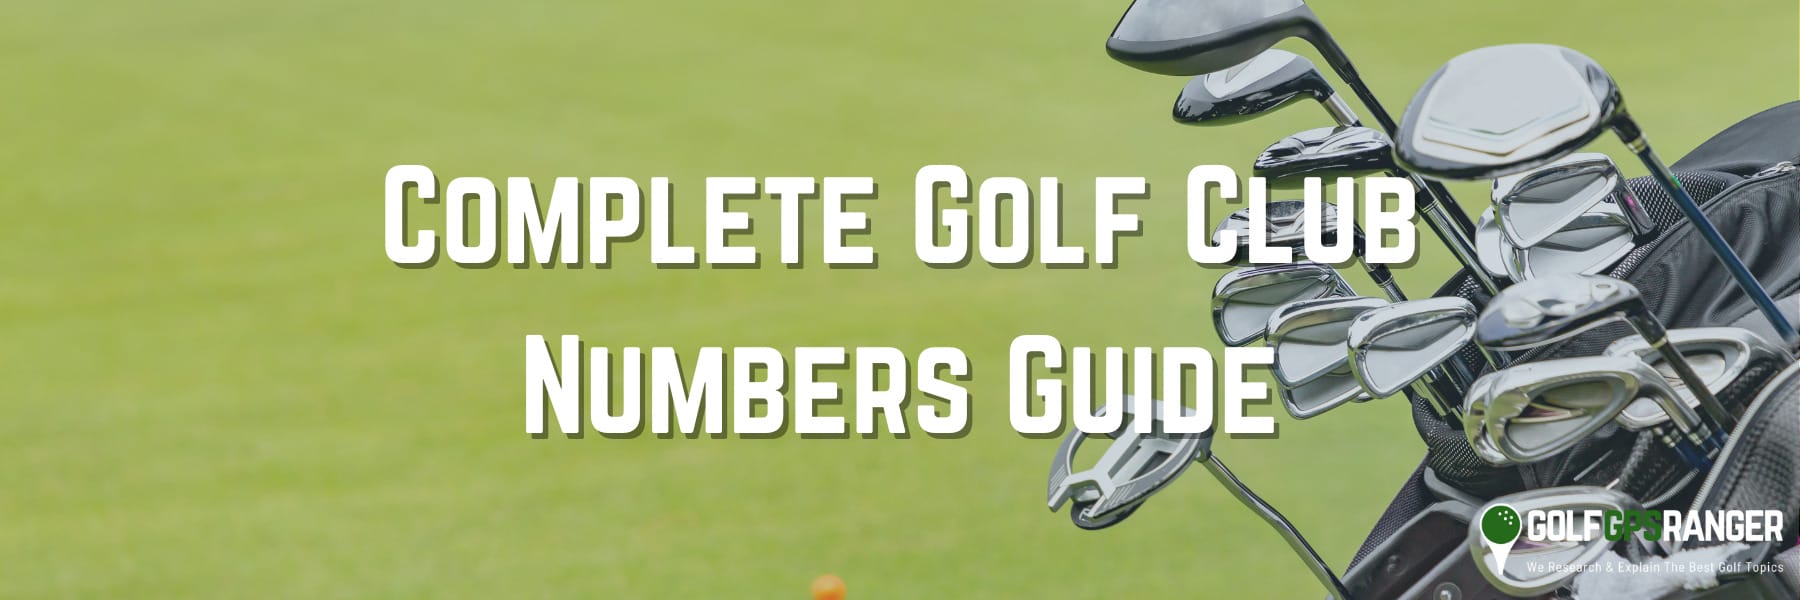 Complete Golf Club Numbers Guide Decoding and Choosing the Right Club